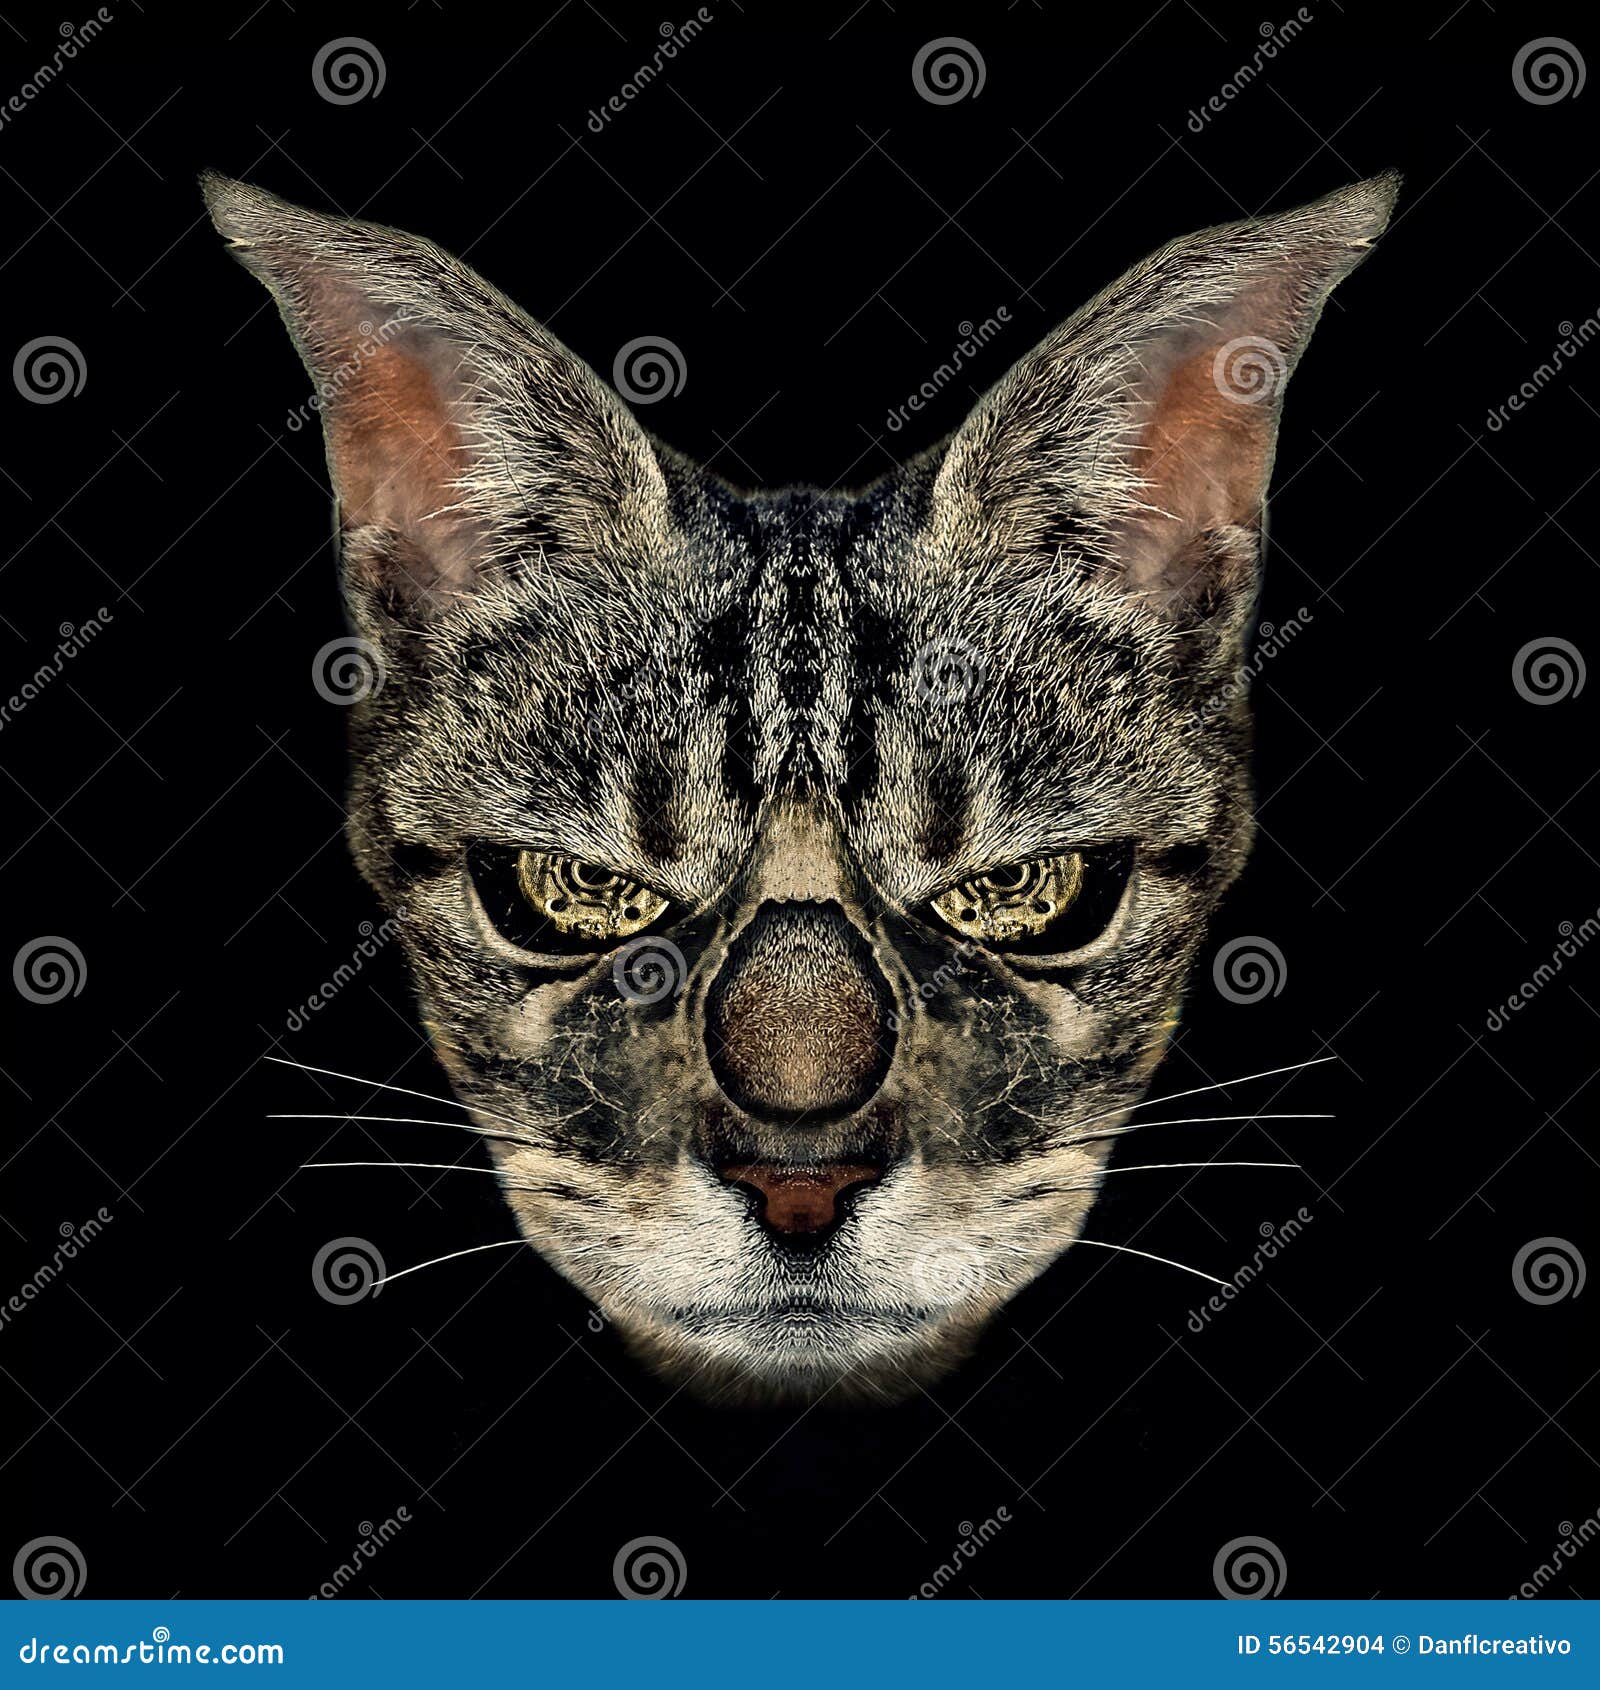 Angry Cat Digital Manipulation Photo Technique Stock Photo - Image